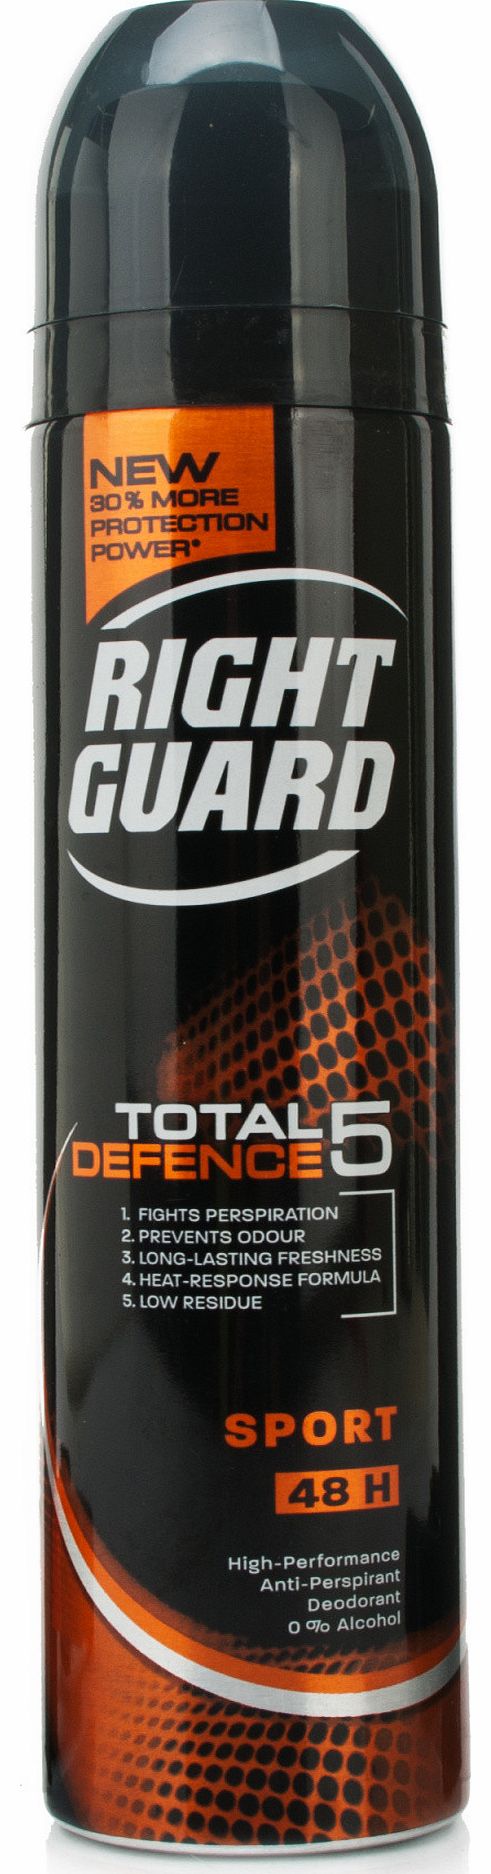 Right Guard Total Defence 5 Sport